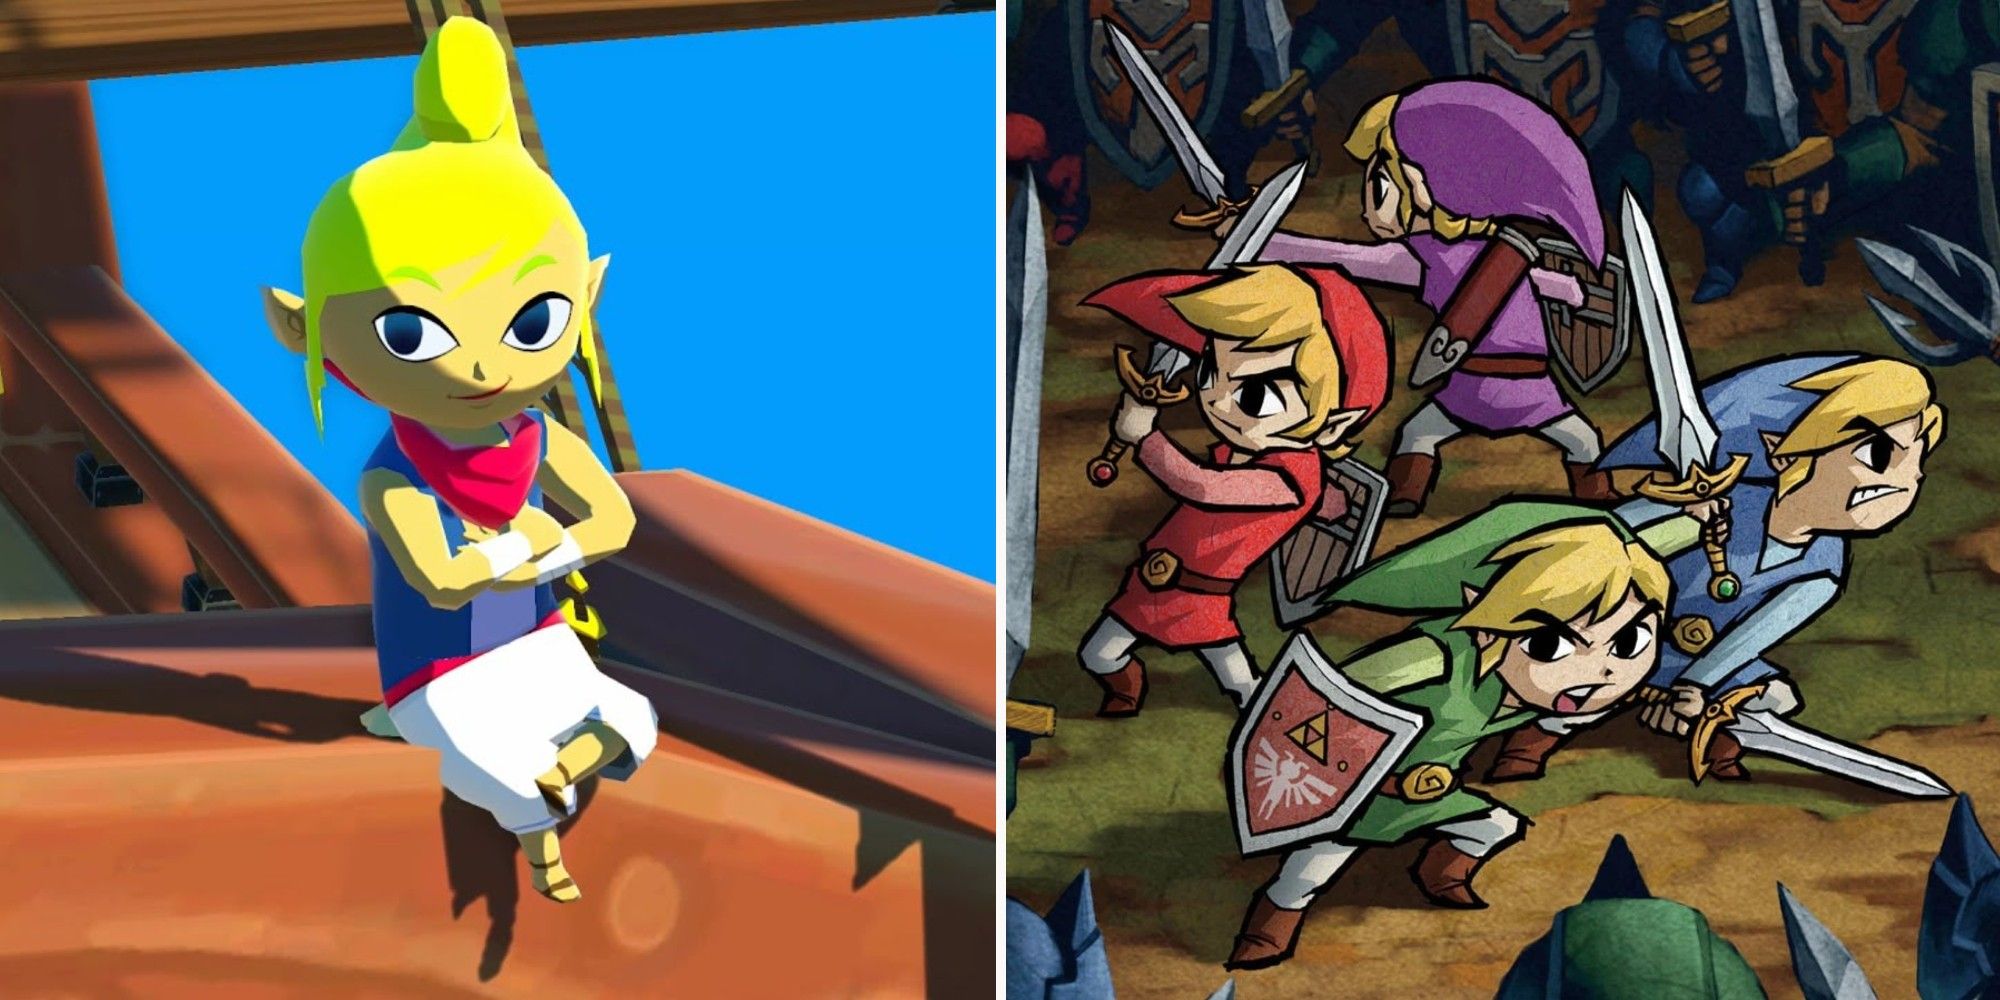 Tetra smirking and leaning in the Wind Waker and four Links stand off in combat in Four Swords Adventure the games